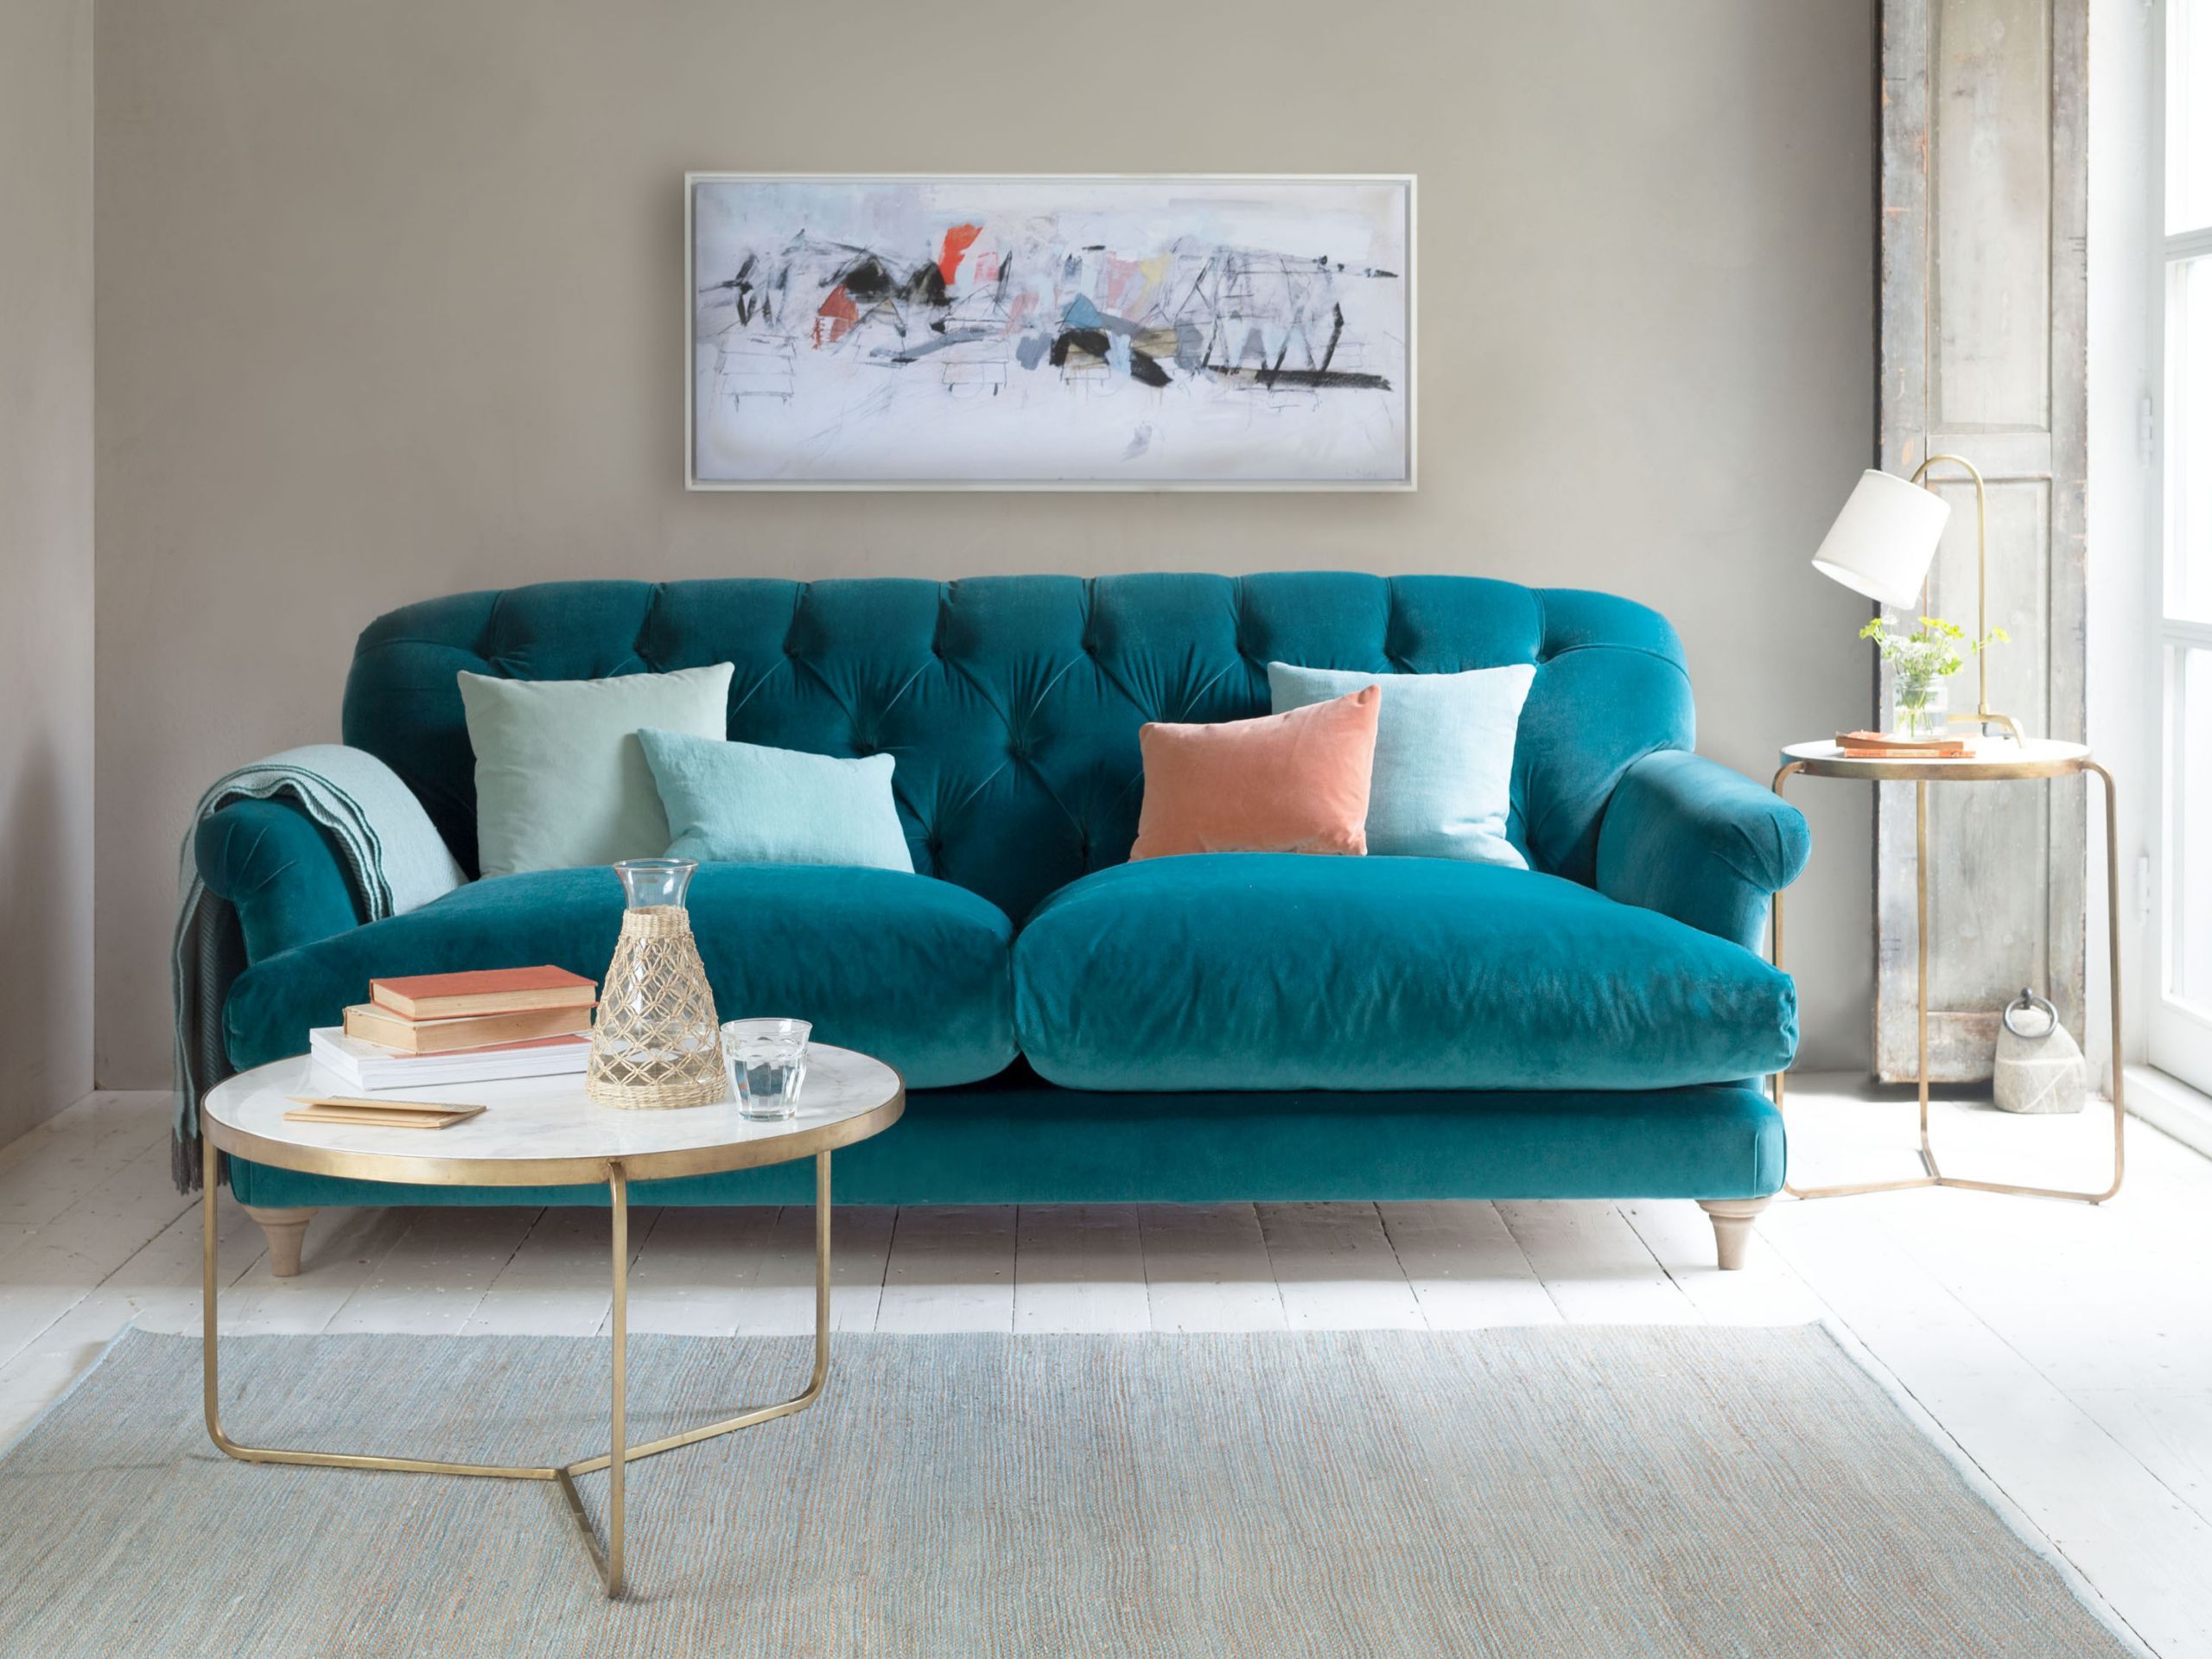 6 Velvet Sofas You Won't Be Able To Resist | Teal Couch Living Room With Regard To Modern Blue Linen Sofas (Gallery 16 of 20)